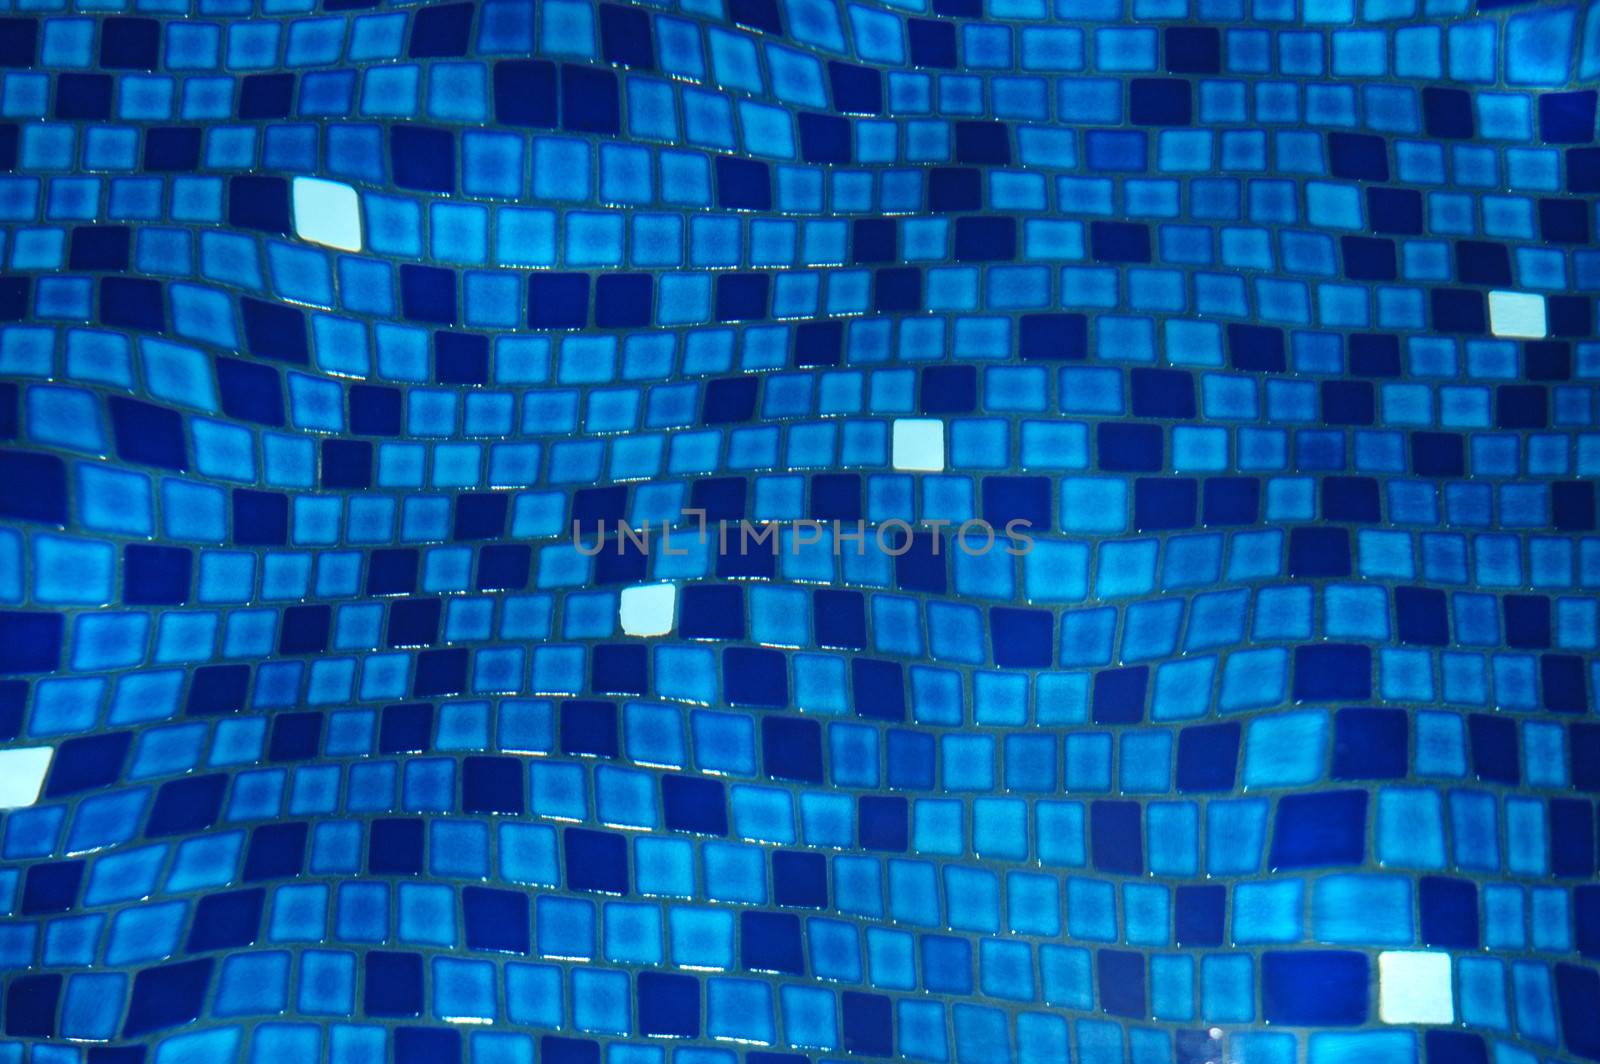 Background image of swimming pool tiles refracted by water